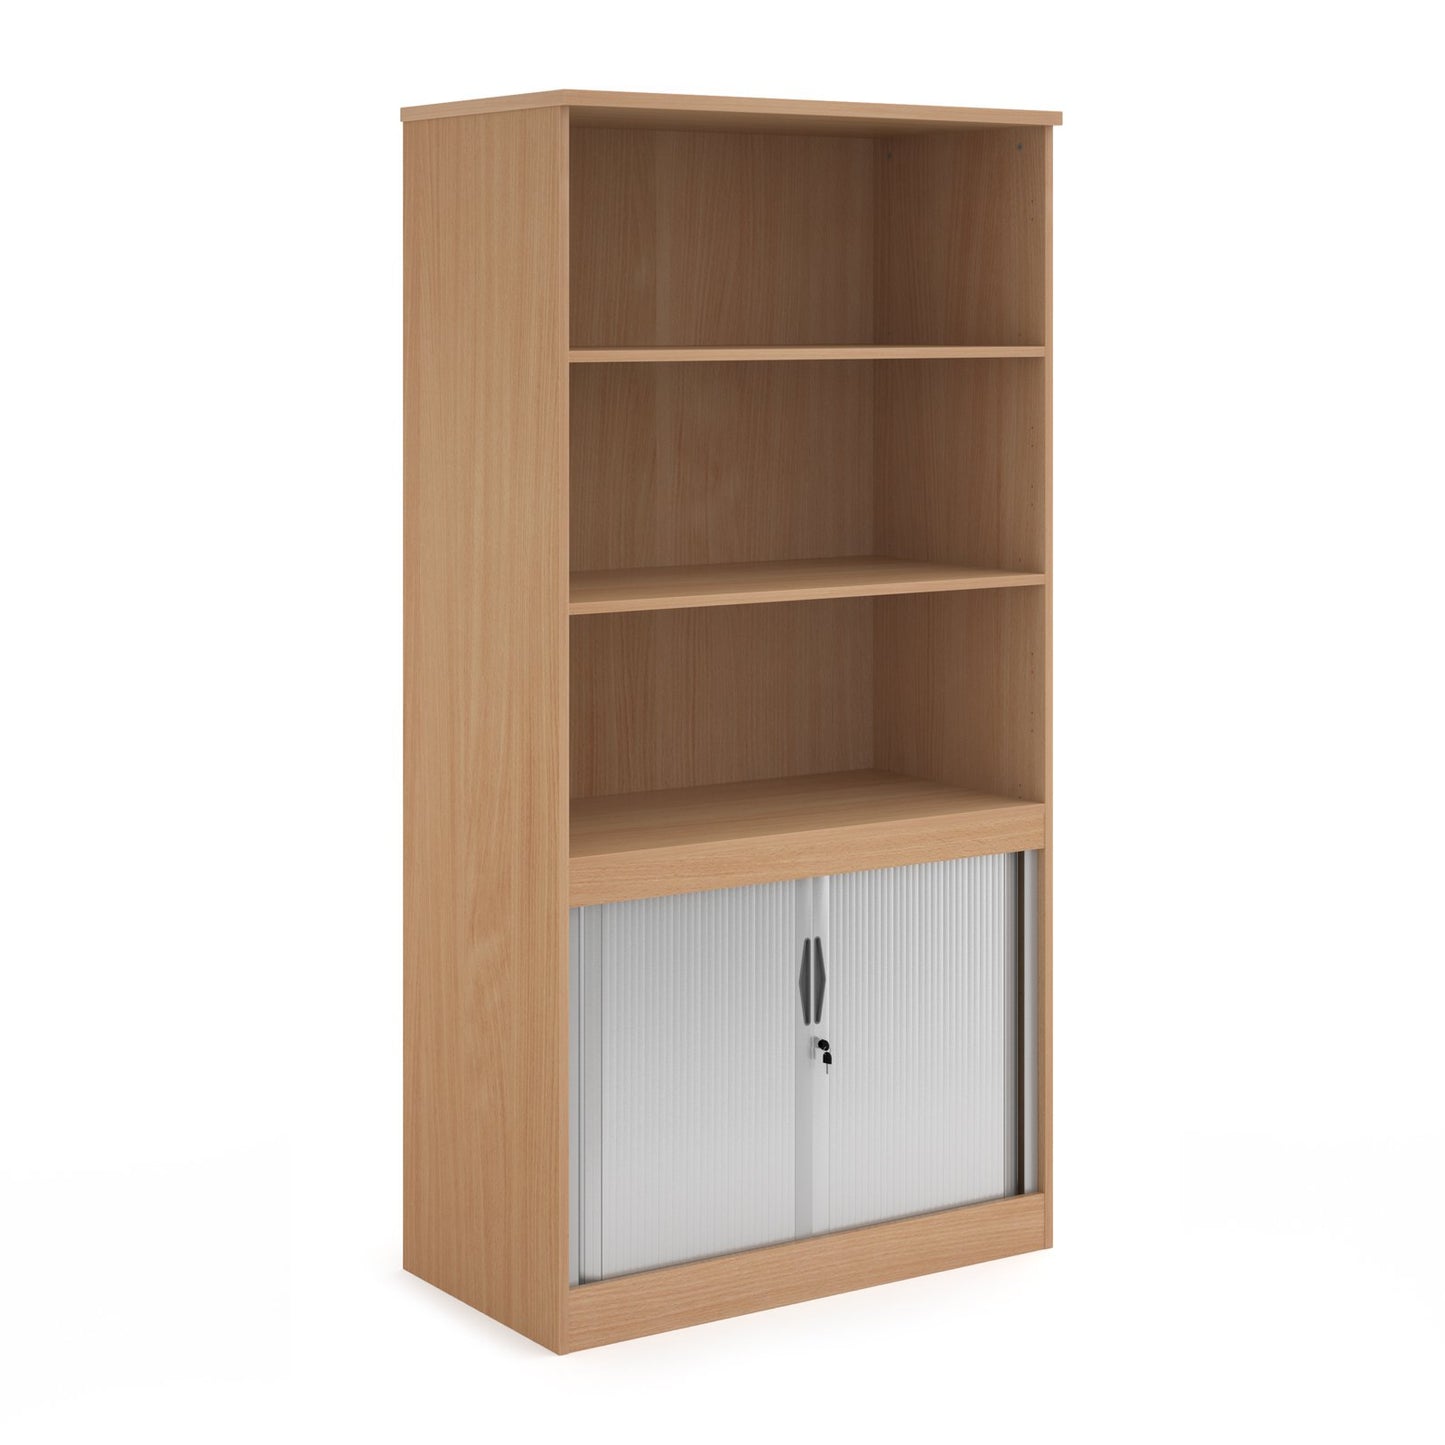 Systems Combi Unit With Tambour And Open Top 1600mm - Oak